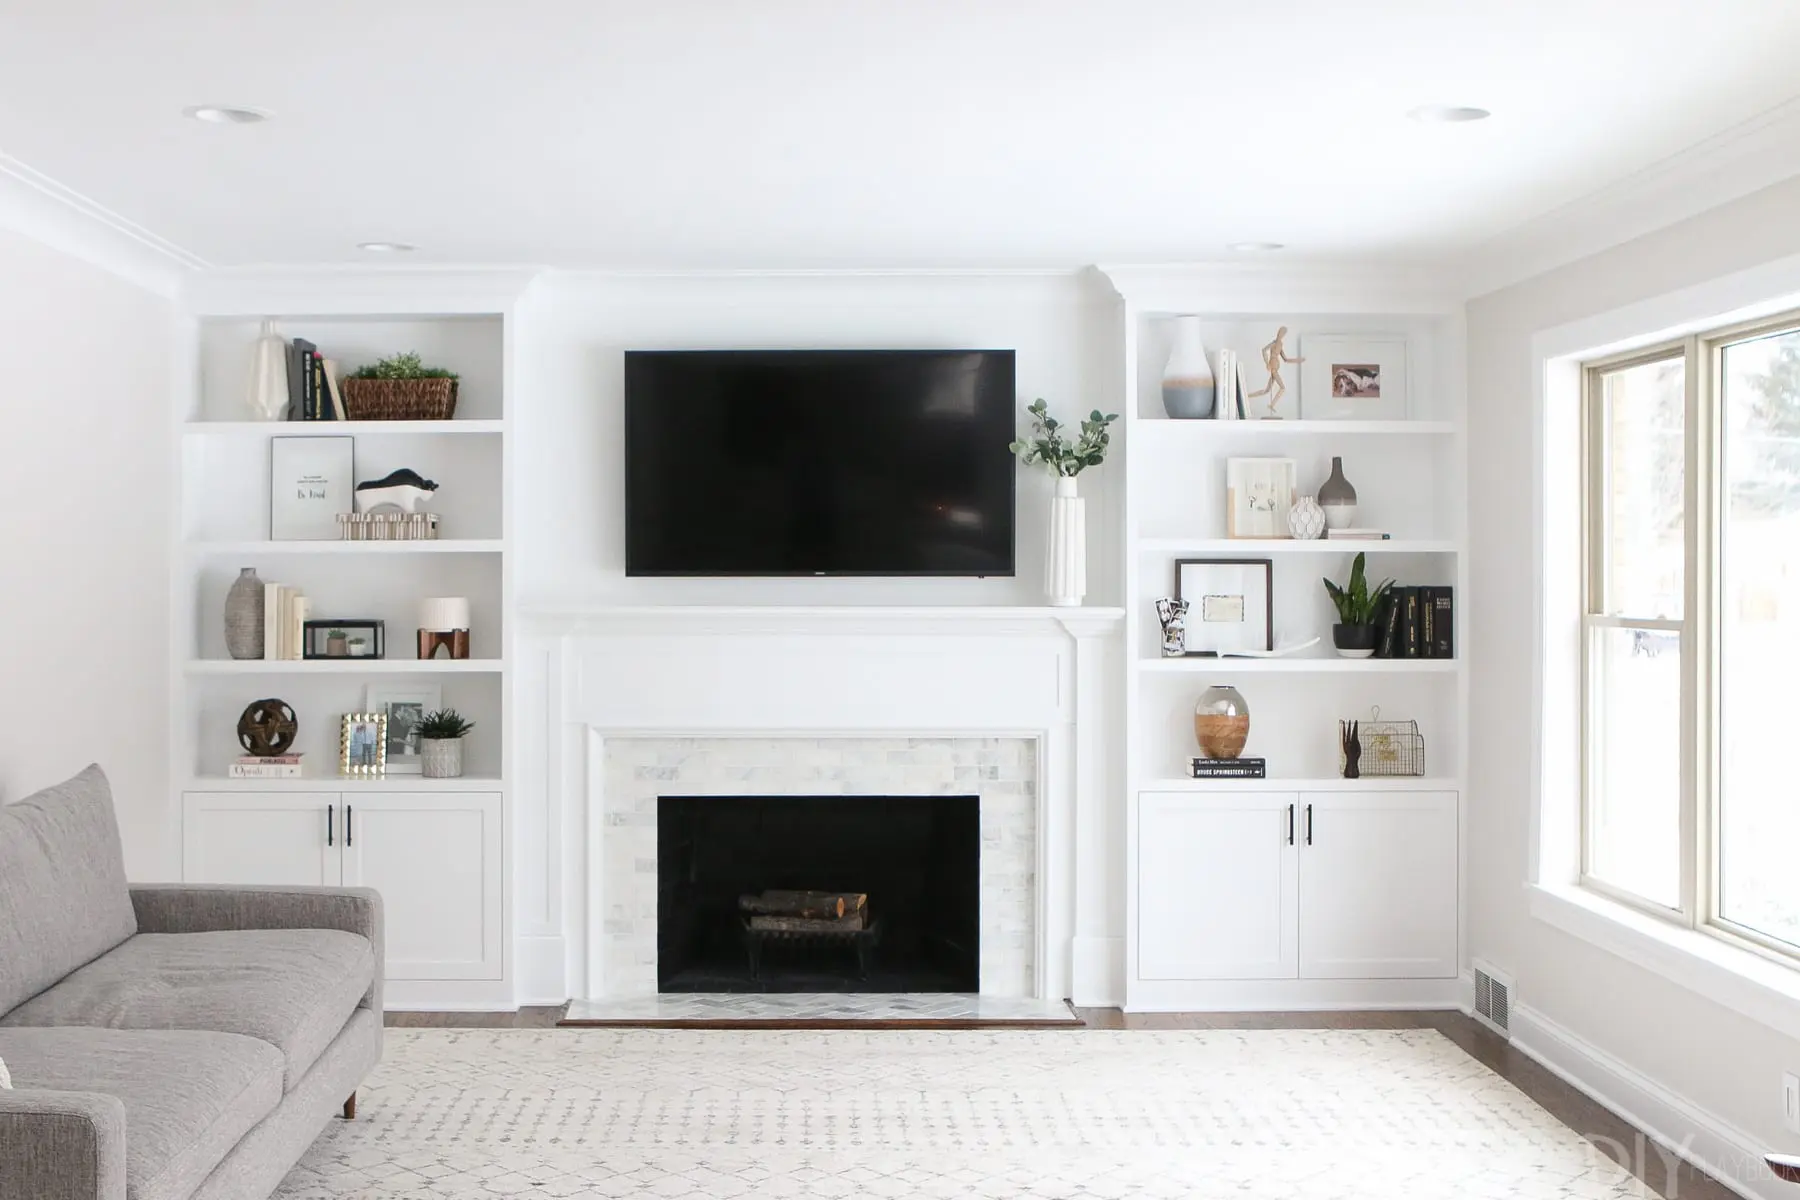 Decorating built-in shelves can be difficult. Read these tips to improve your home decor styling